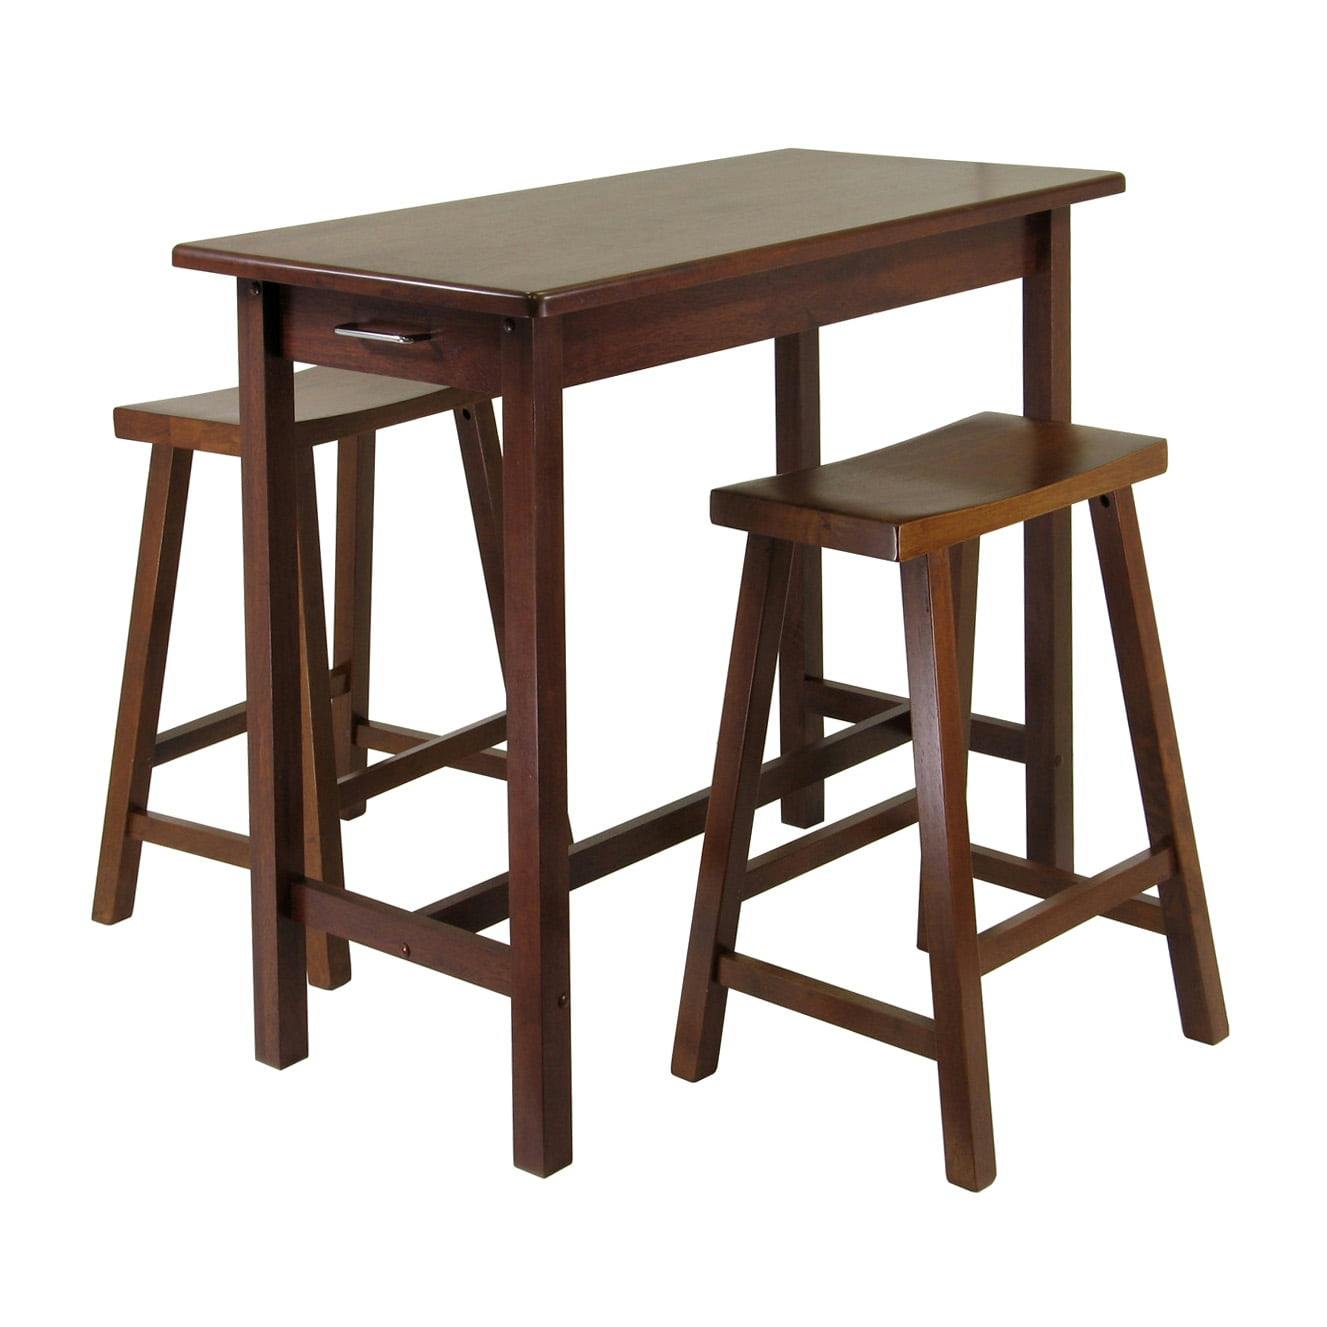 Winsome Transitional 3-Pc Walnut Breakfast Bistro Set with Saddle Stools